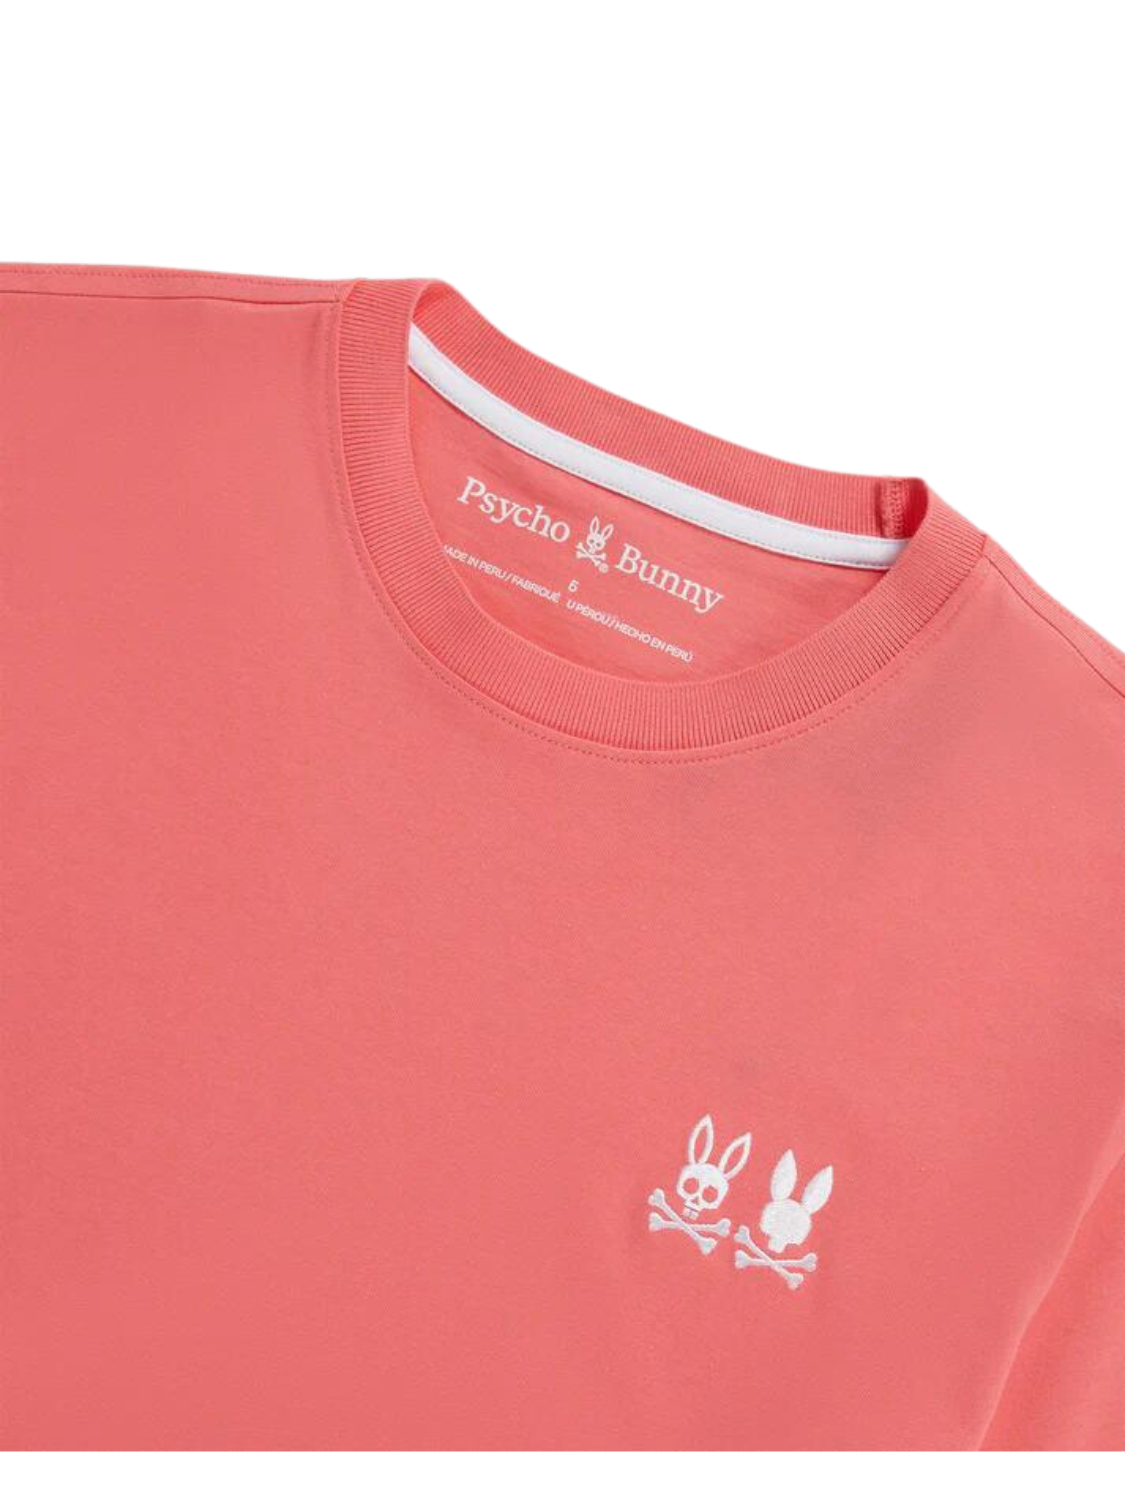 men's Kingwood tee with contrasting stripe along the cuffs and embroidered twin Bunny logo